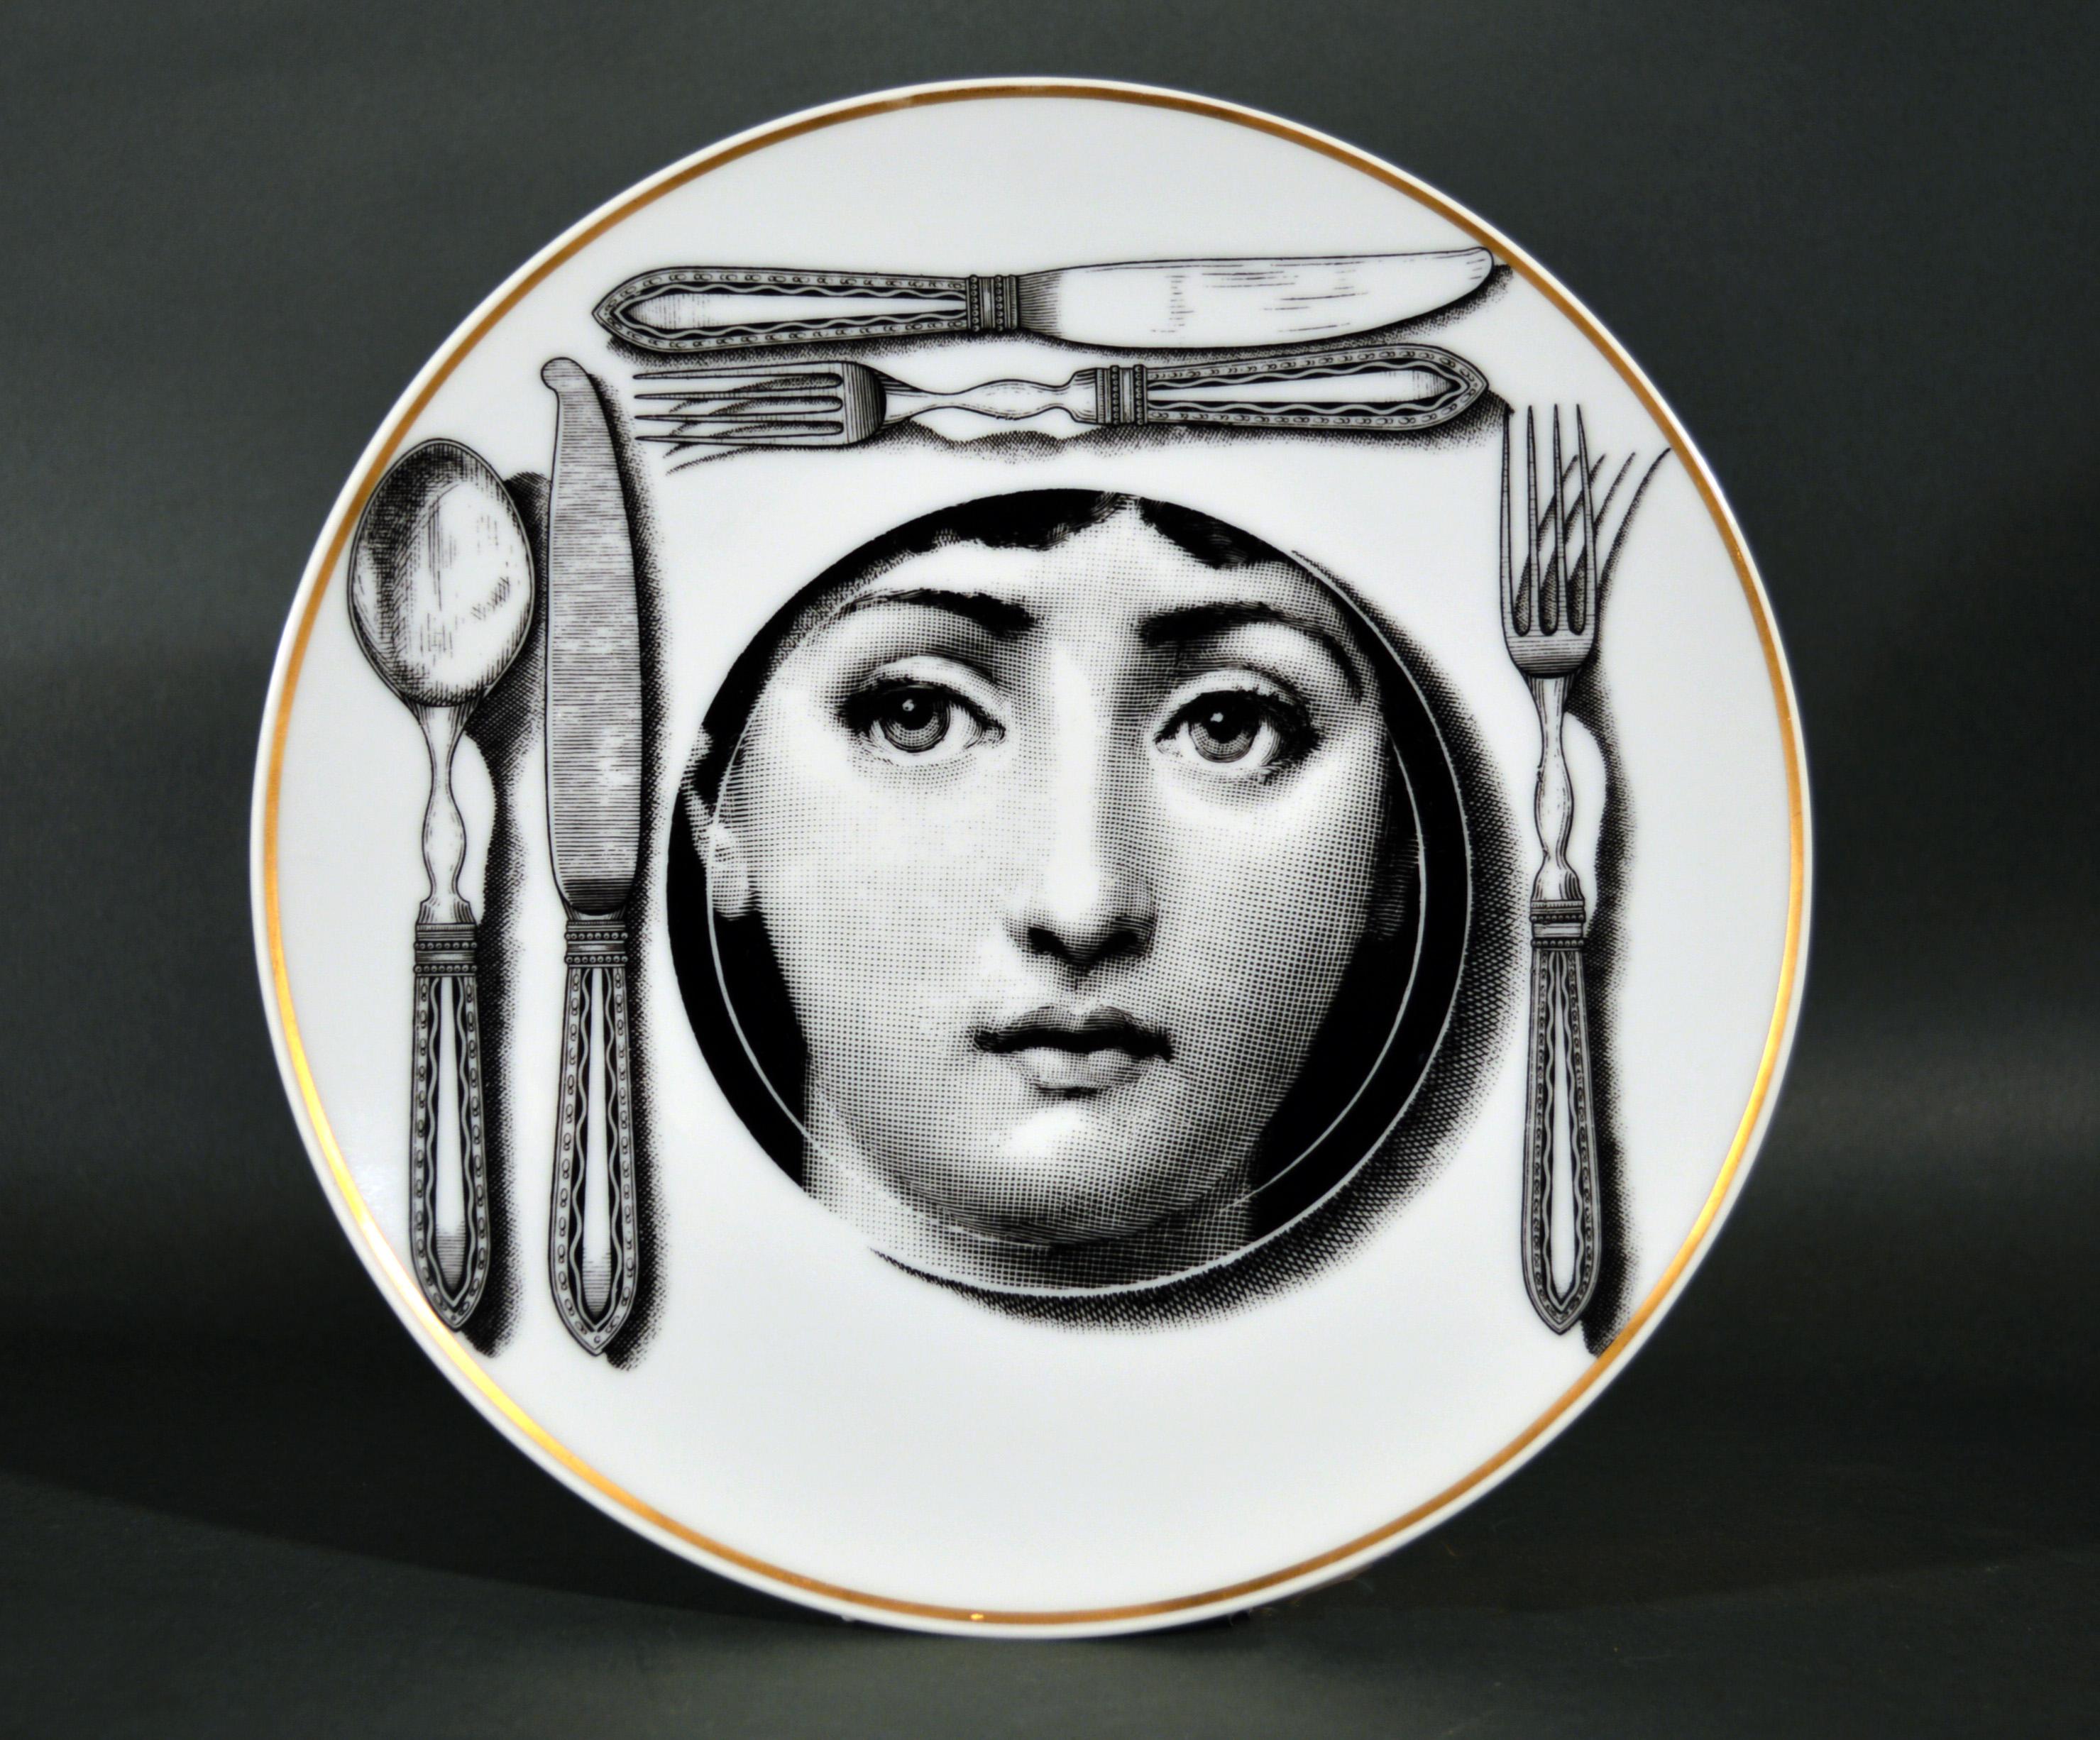 Fornasetti Rosenthal set of six plates- Temi e Variazioni-Themes and Variation,
Motiv # 11, 13, 14, 15, 16 32,
circa 1980s
(NY0922/)

Wonderful rare examples of the plates made by Rosenthal in the 1980s from Piero Fornasetti designs.

Dimensions: